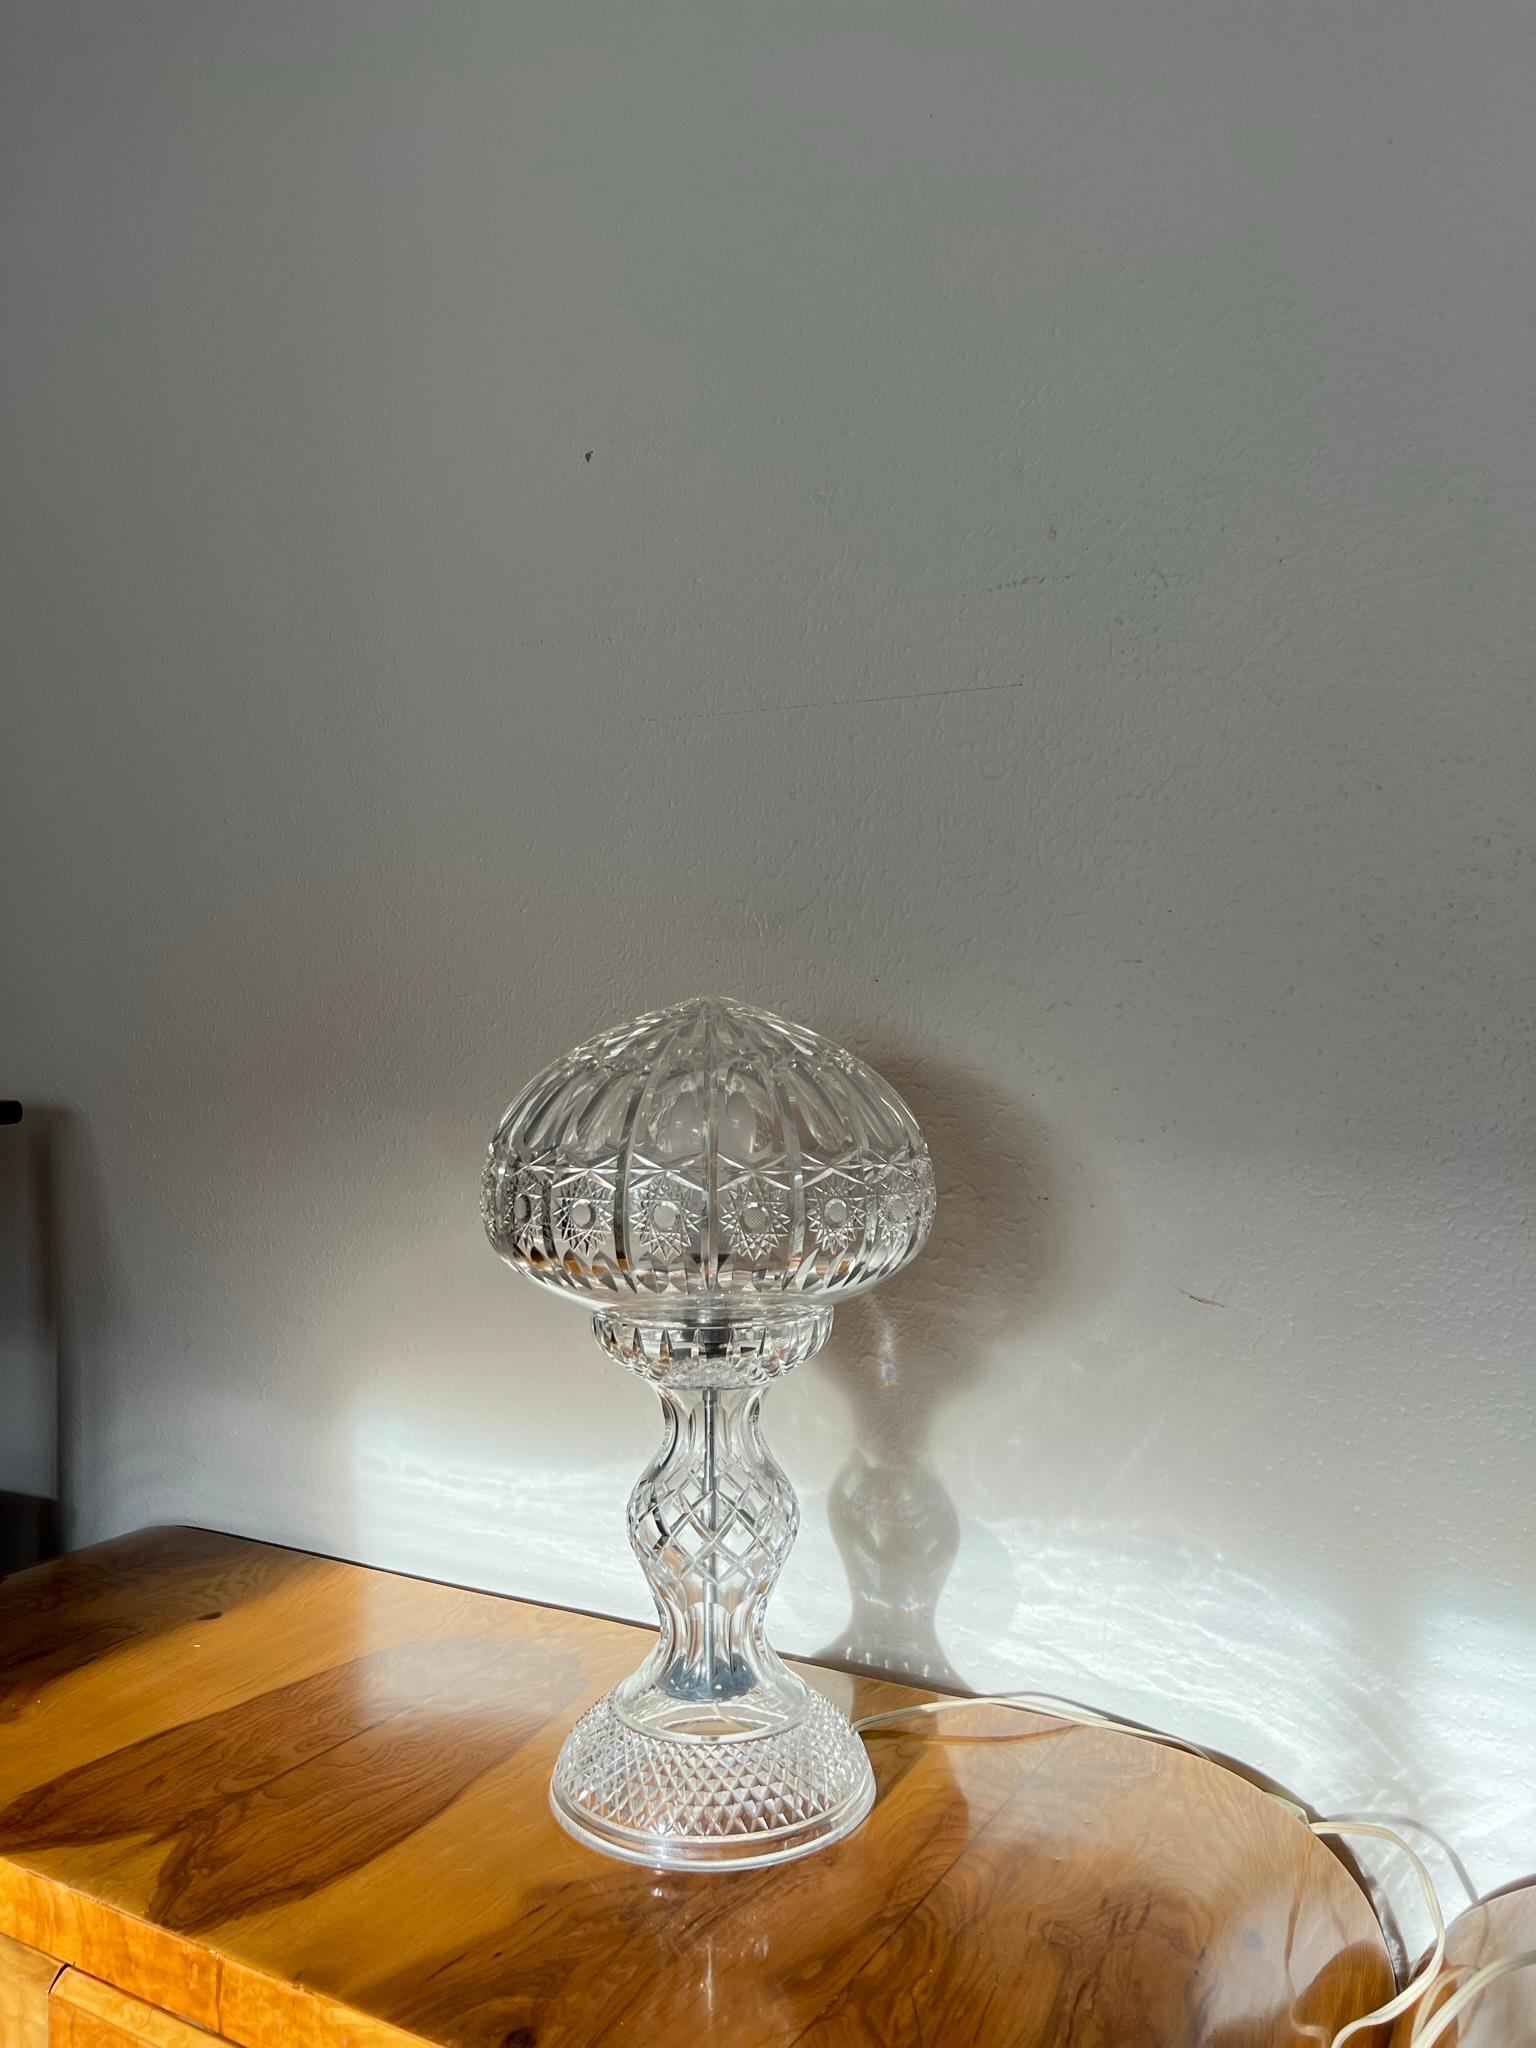 Antique hand cut crystal lamp with baluster vase base and mushroom shade.

Measures : 18.5” H x 10” W.